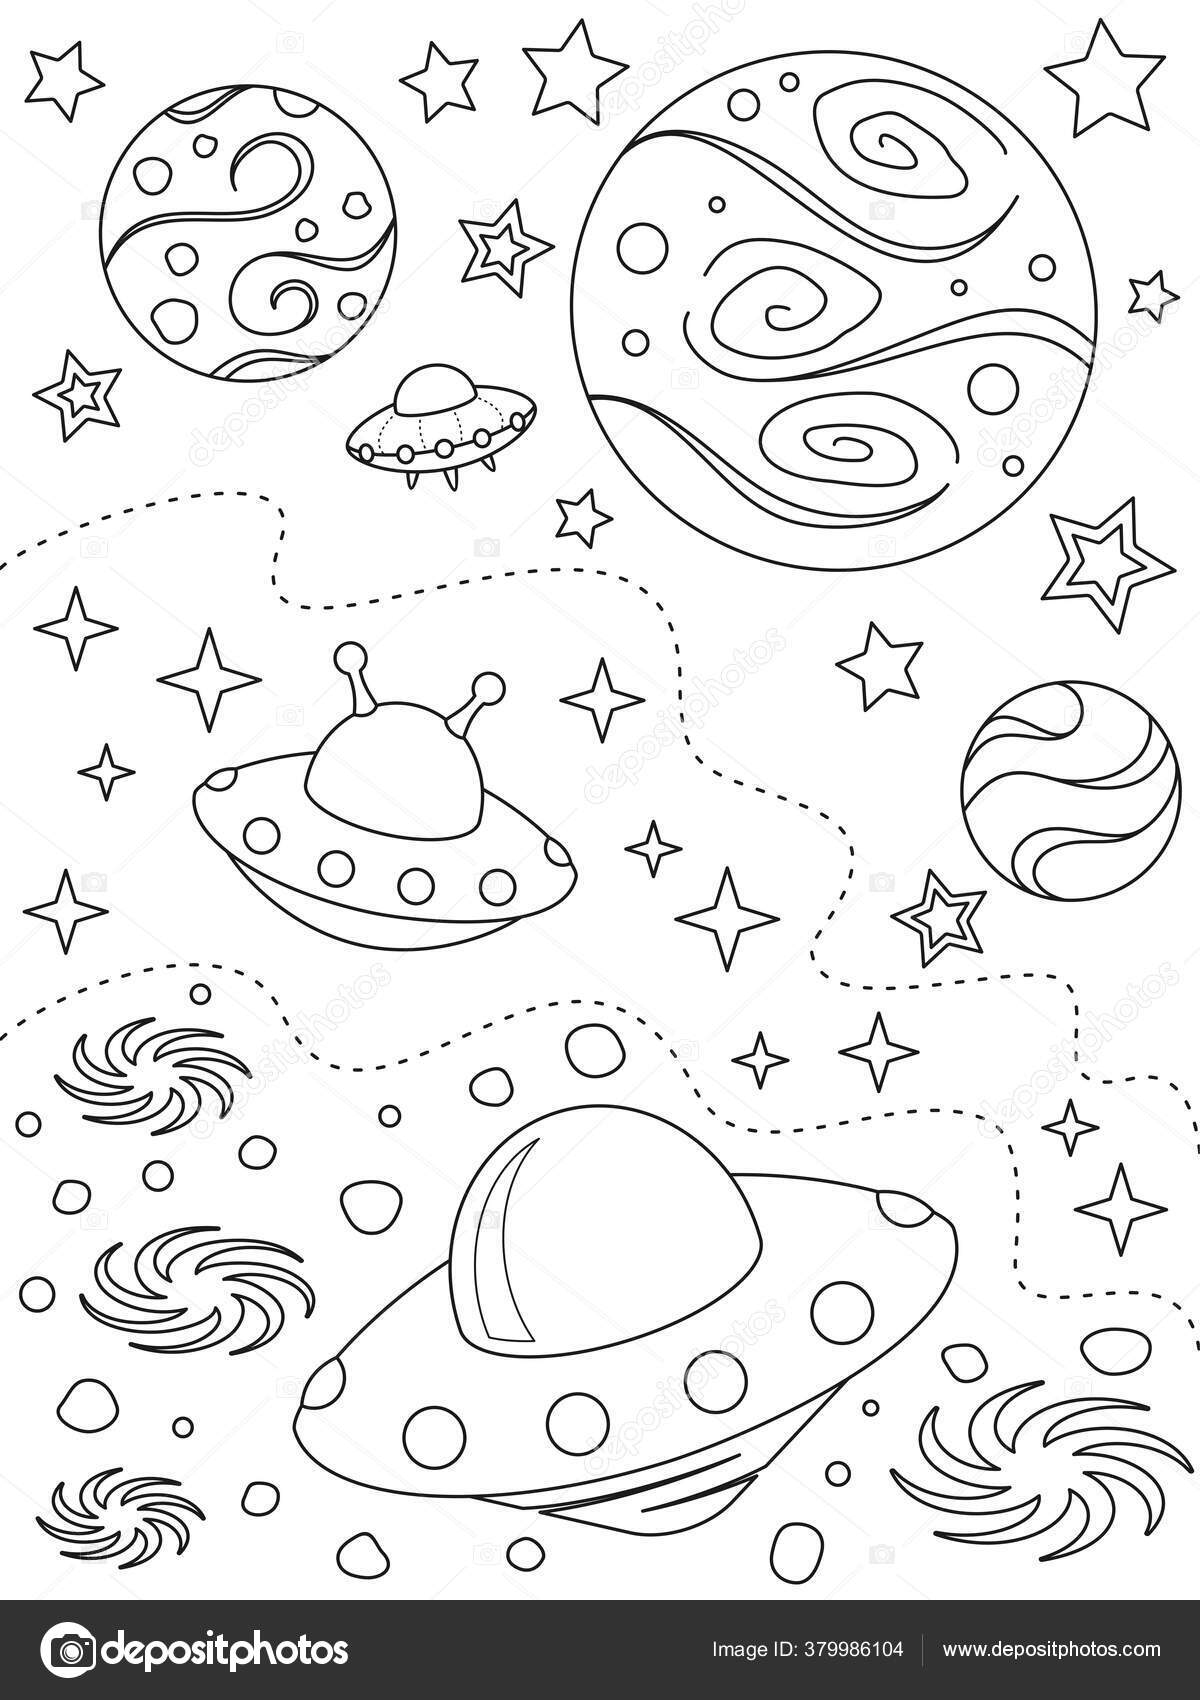 Coloring page different planets alien spaceships nebulae stars black elements stock vector by mysticamailru